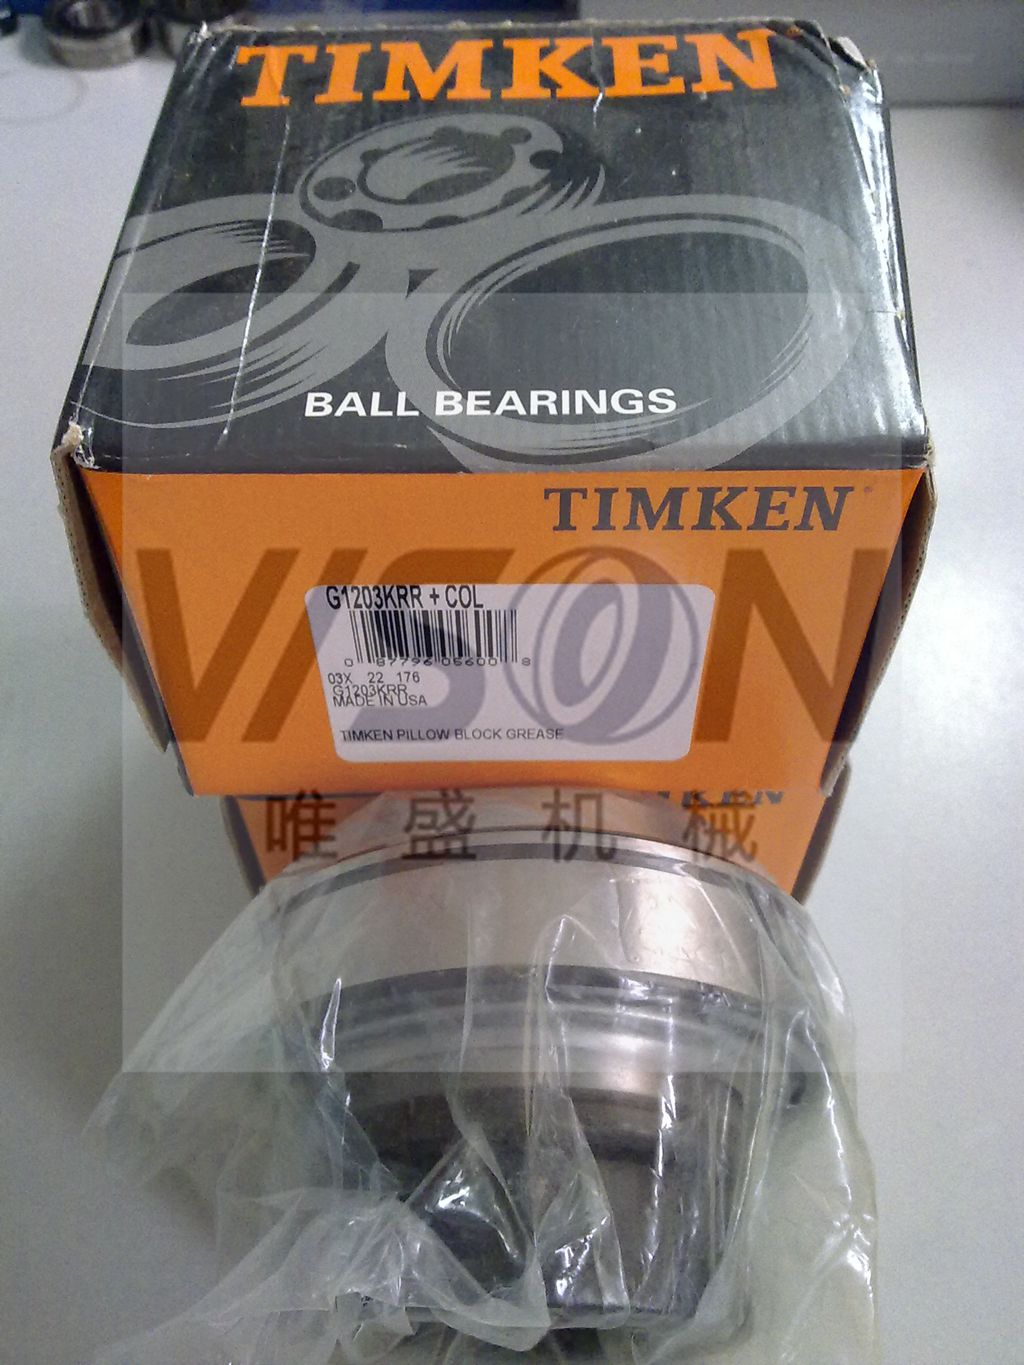 TIMKEN轴承 006-11581A PULLEY , 006-11581A PULLEY 尺寸参数报价